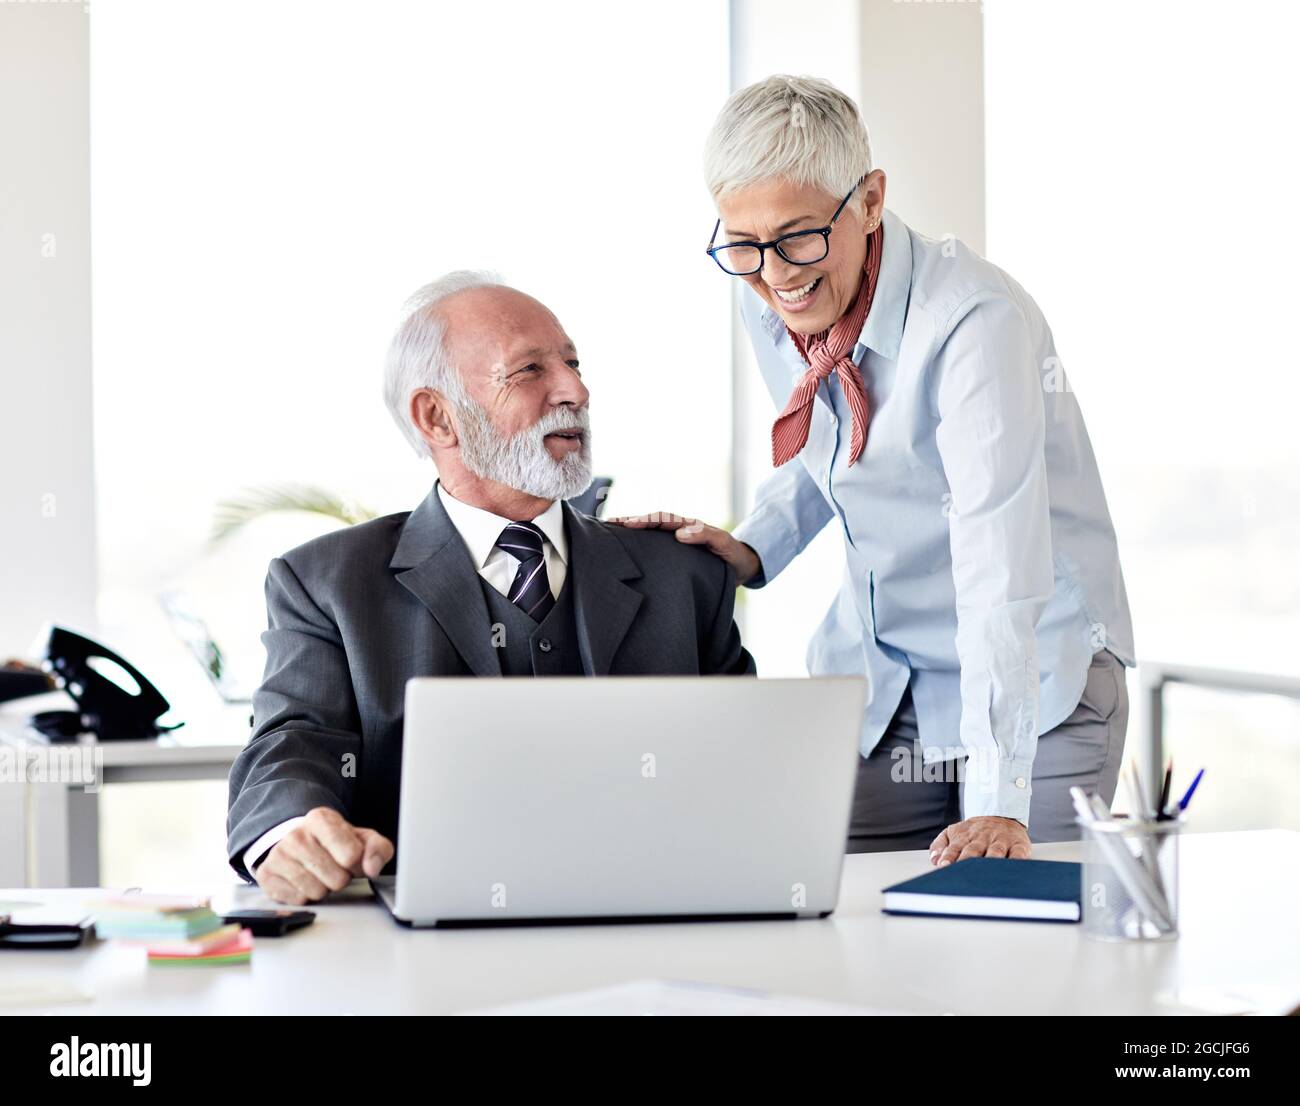 business office person discussion laptop teamwork senior meeting businesswoman businessman together Stock Photo